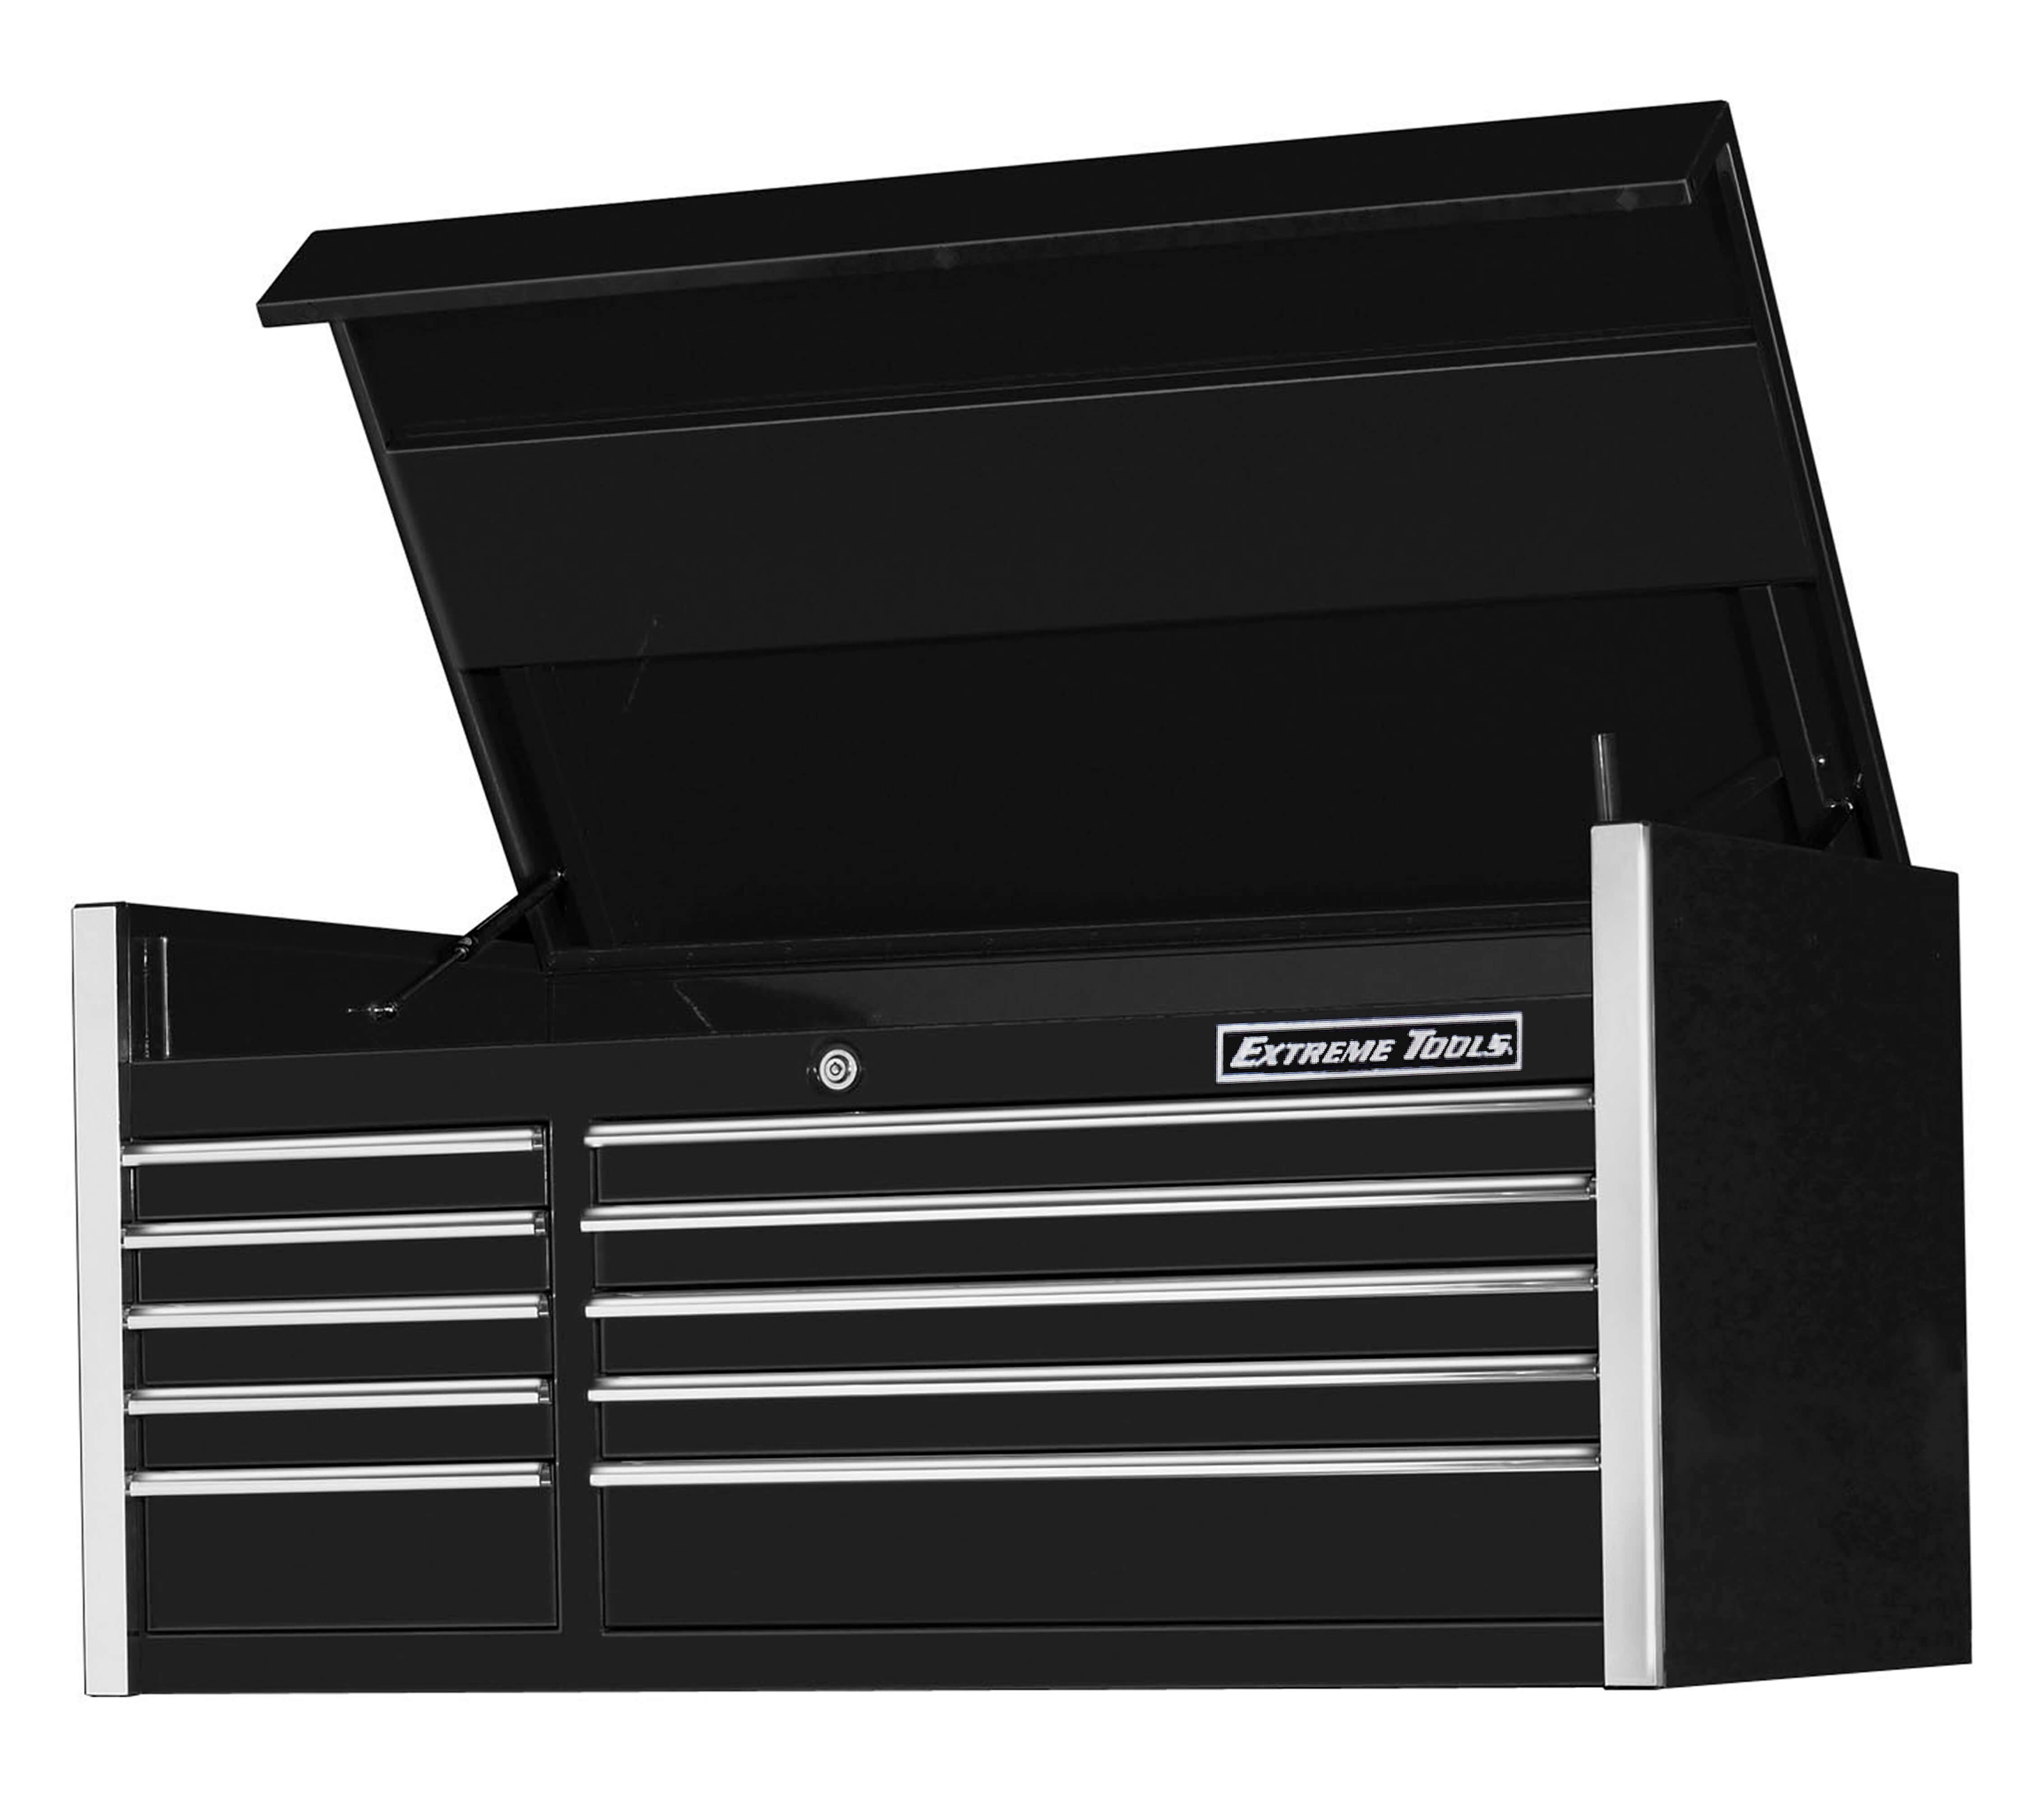 EXTREME TOOLS® 41 inch 8 DRAWER STANDARD TOOL CHEST